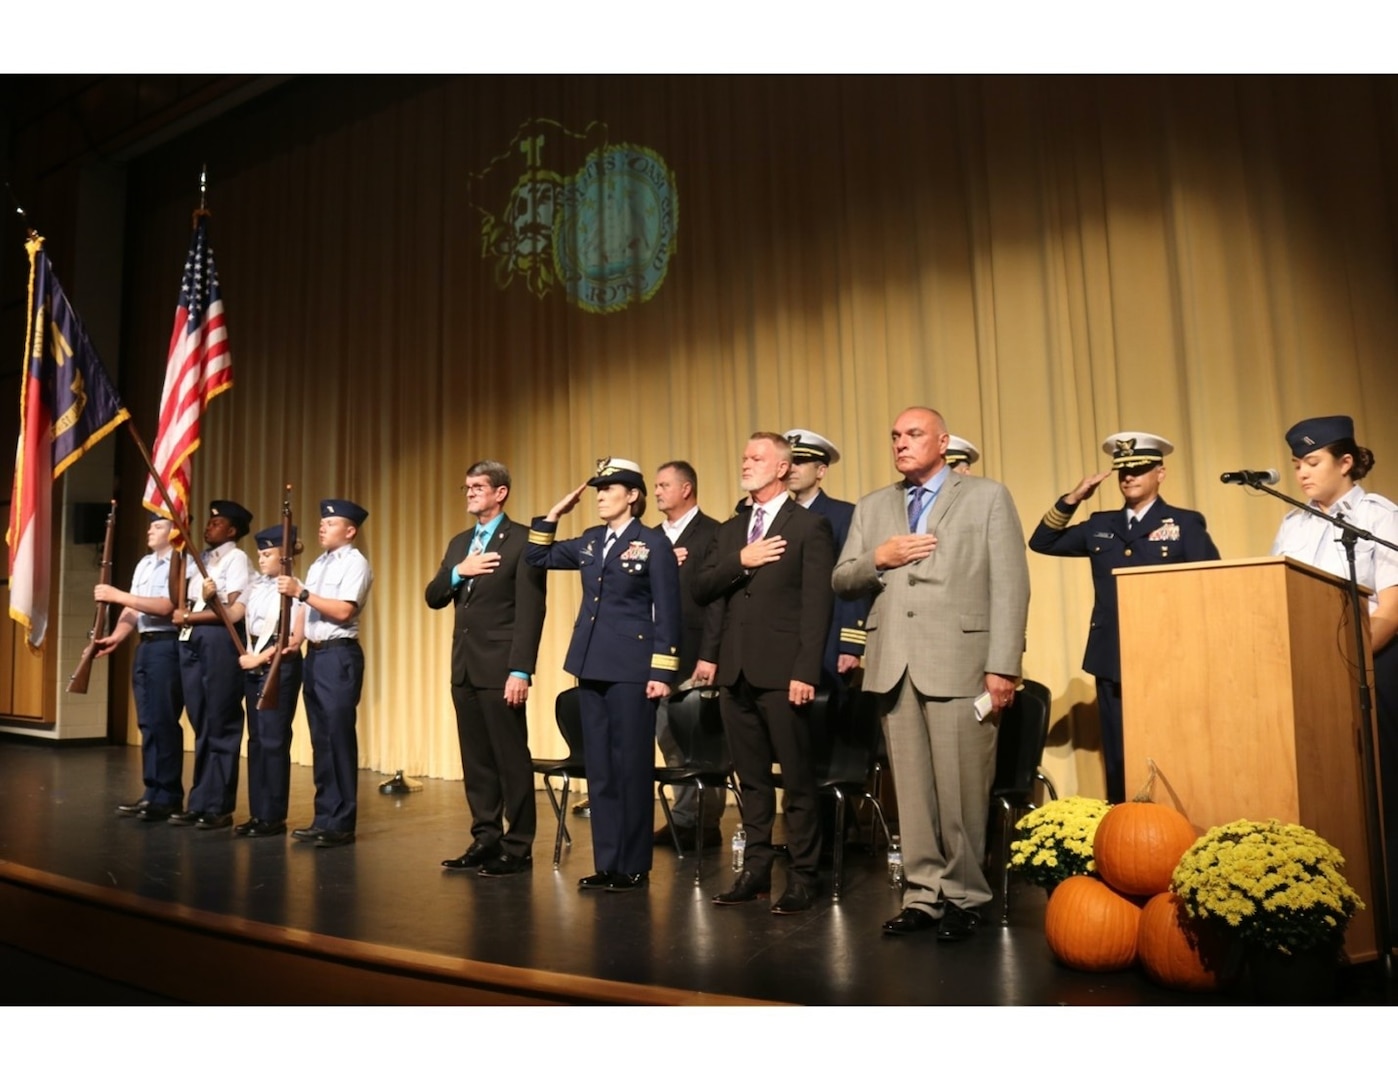 Four cadets from the Topsail High School Coast Guard JROTC color guard present the colors at their Unit Establishment Ceremony at Topsail High School in Hampstead, North Carolina, Oct. 27, 2022. Representative Carson Smith from the North Carolina General Assembly (front row, left) and Rear Admiral Megan Dean, Coast Guard Director of Governmental and Public Affairs (front row, second from left) each delivered remarks during the ceremony. (U.S. Coast Guard photo.)